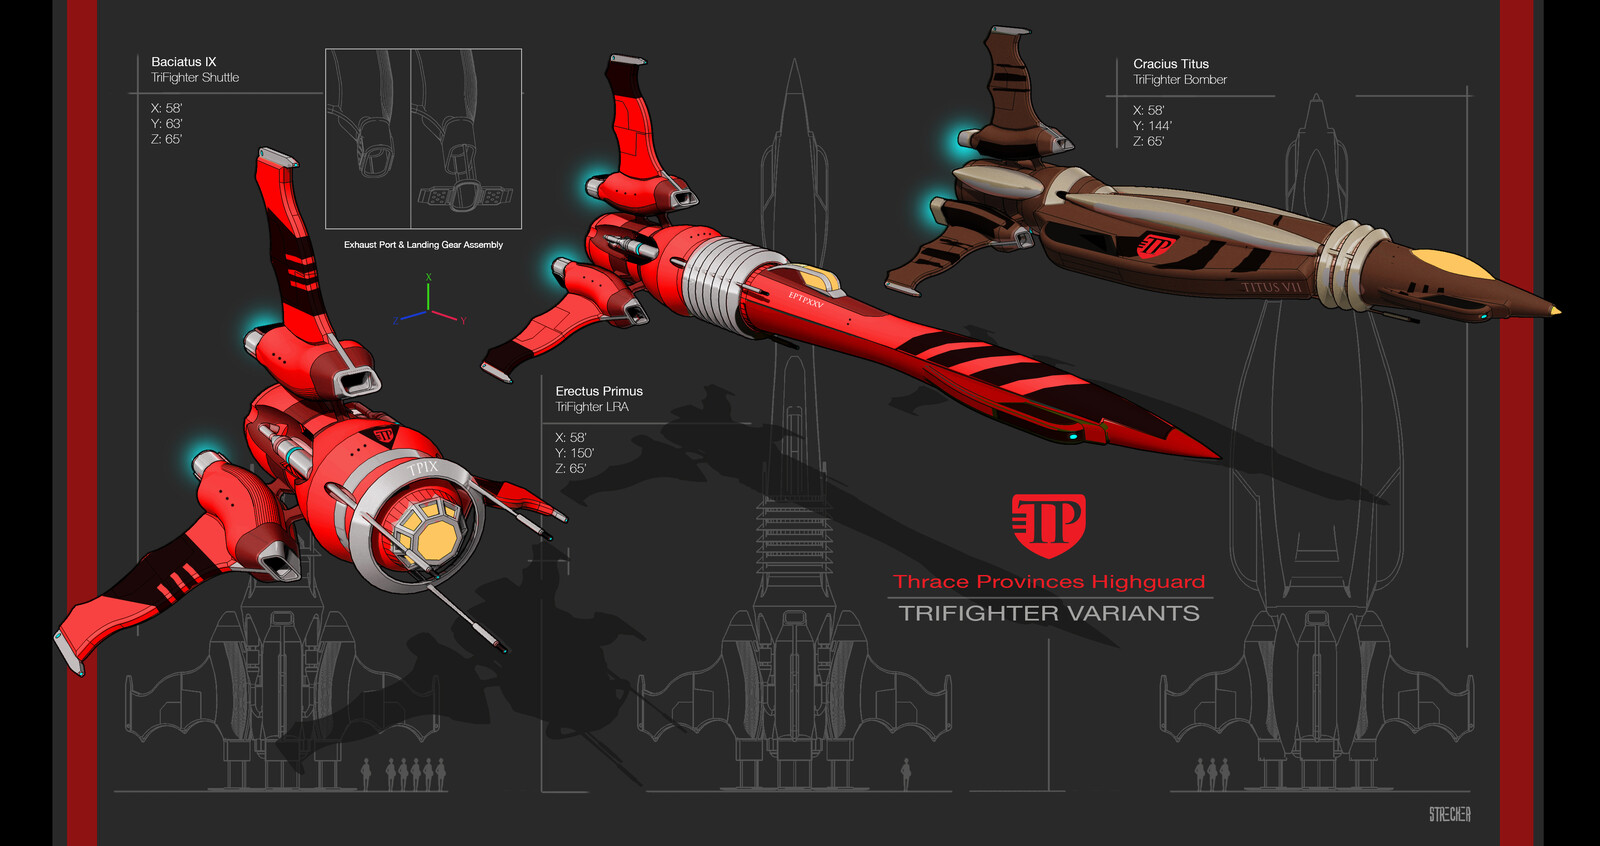 Modular multi-role space fighters from Thrace Provinces Highguard